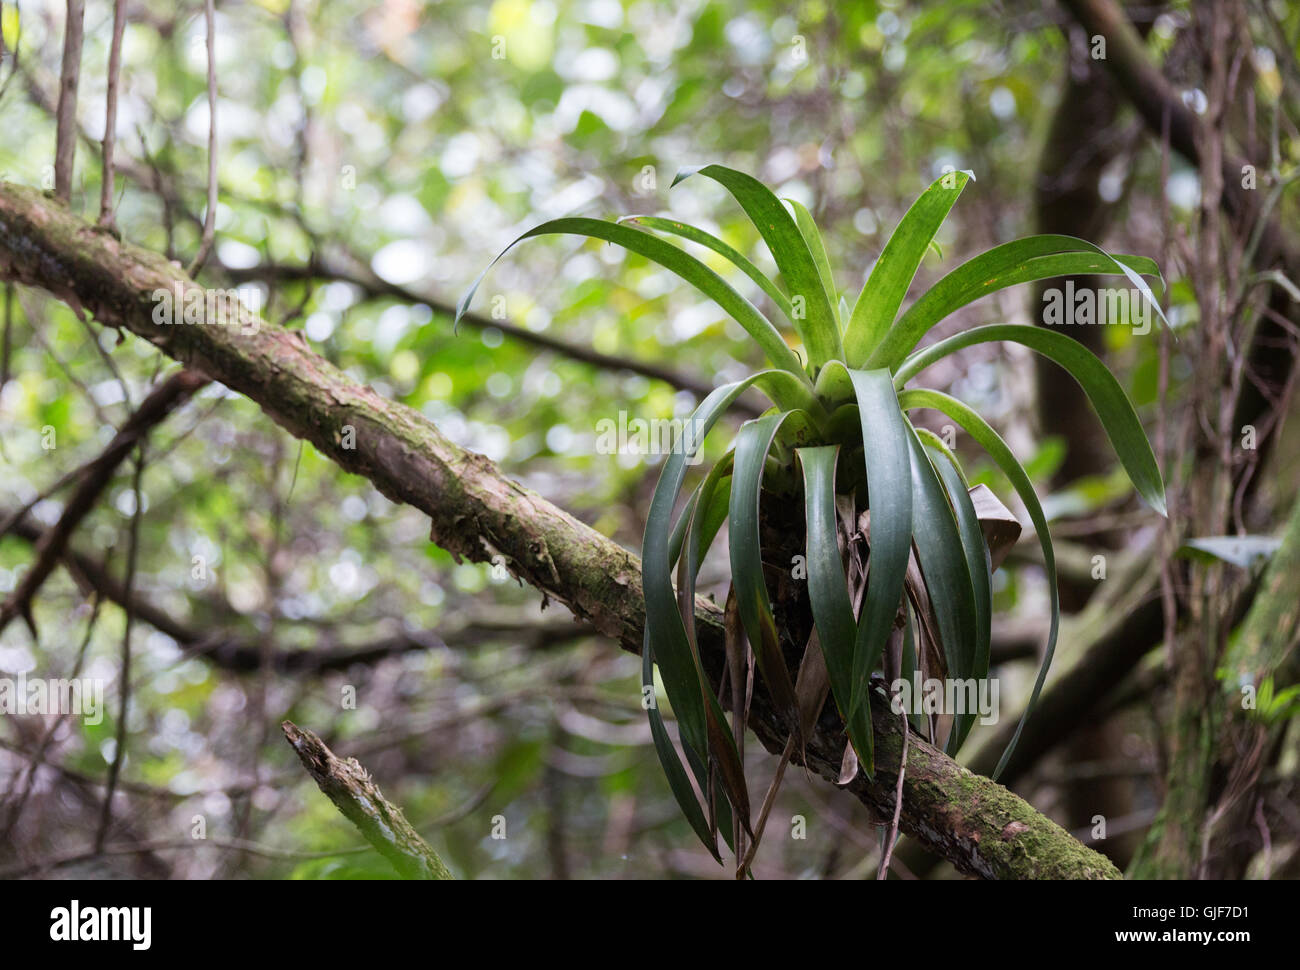 Bromeliad growing on a tree branch, Poas national park rainforest, Costa Rica, Central America Stock Photo